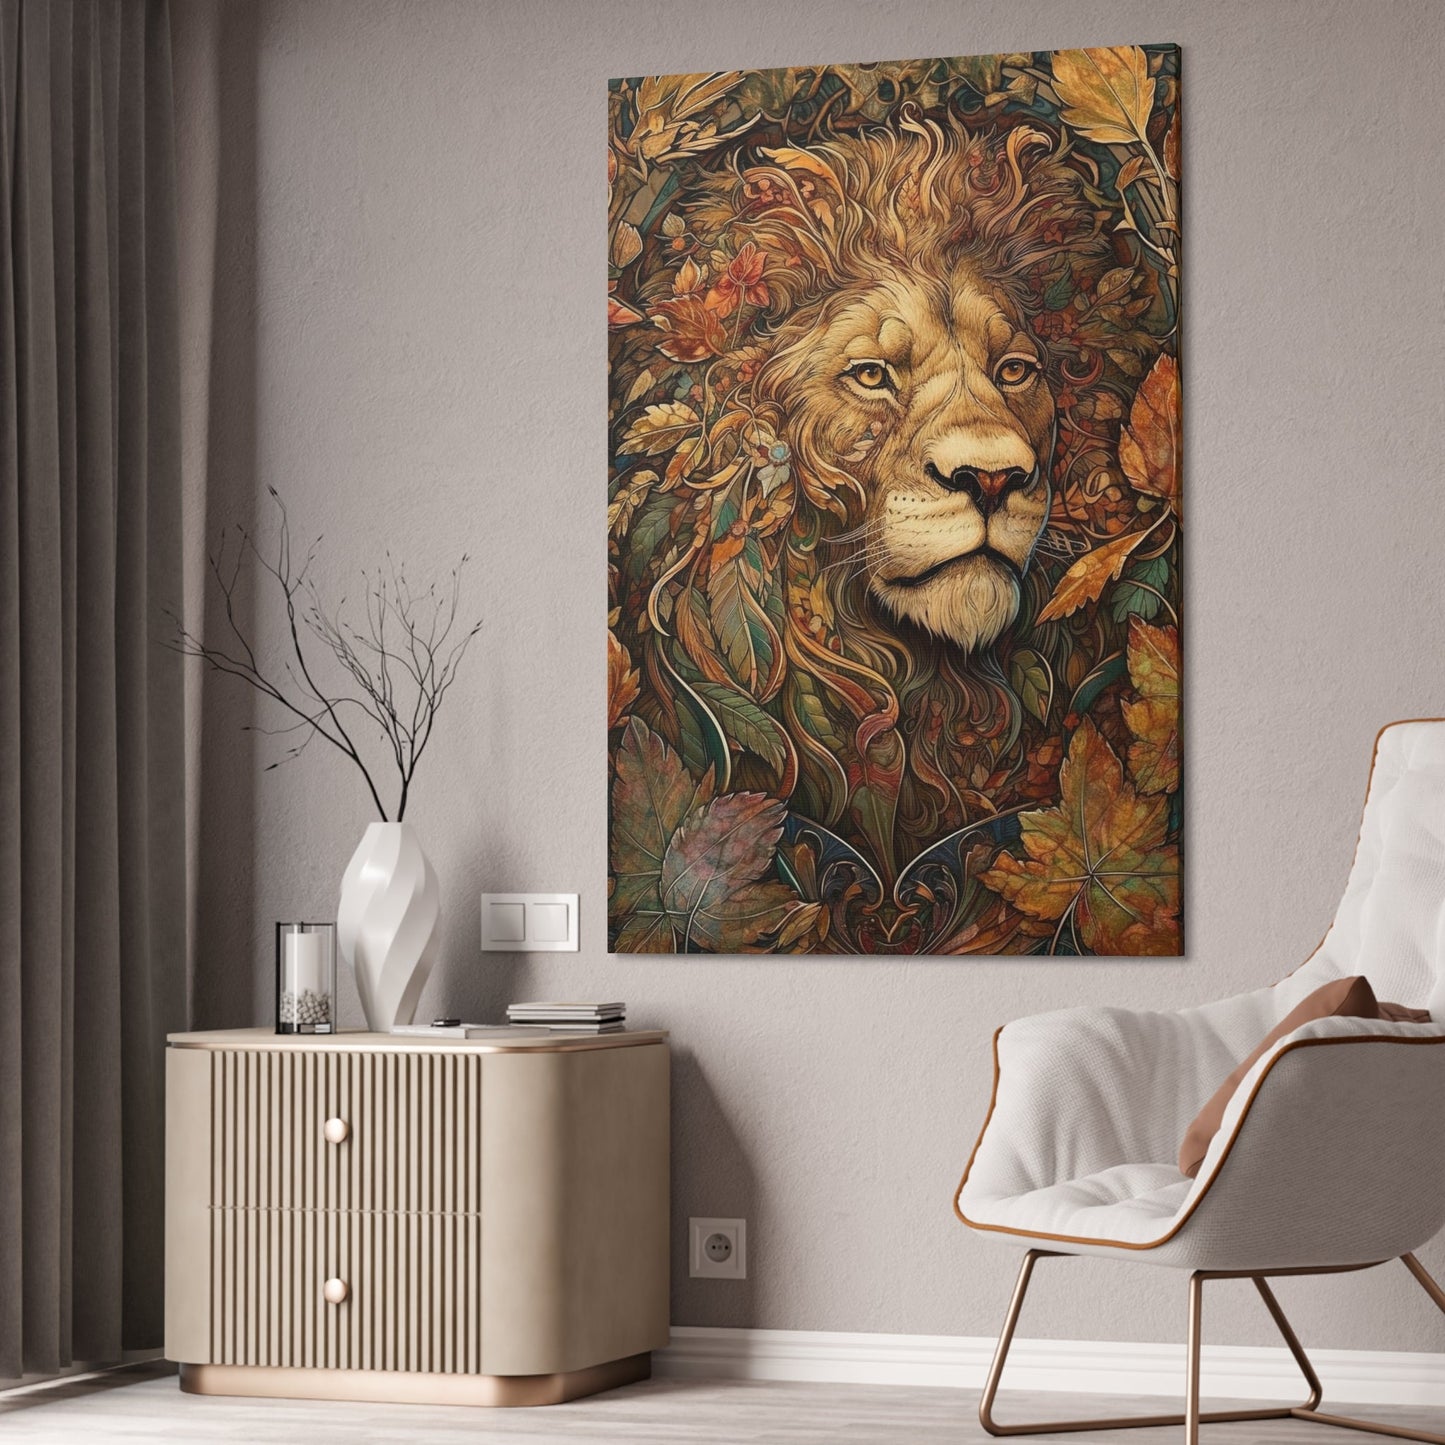 Roaring Beauty: Natural Canvas Print of the Magnificent Lion